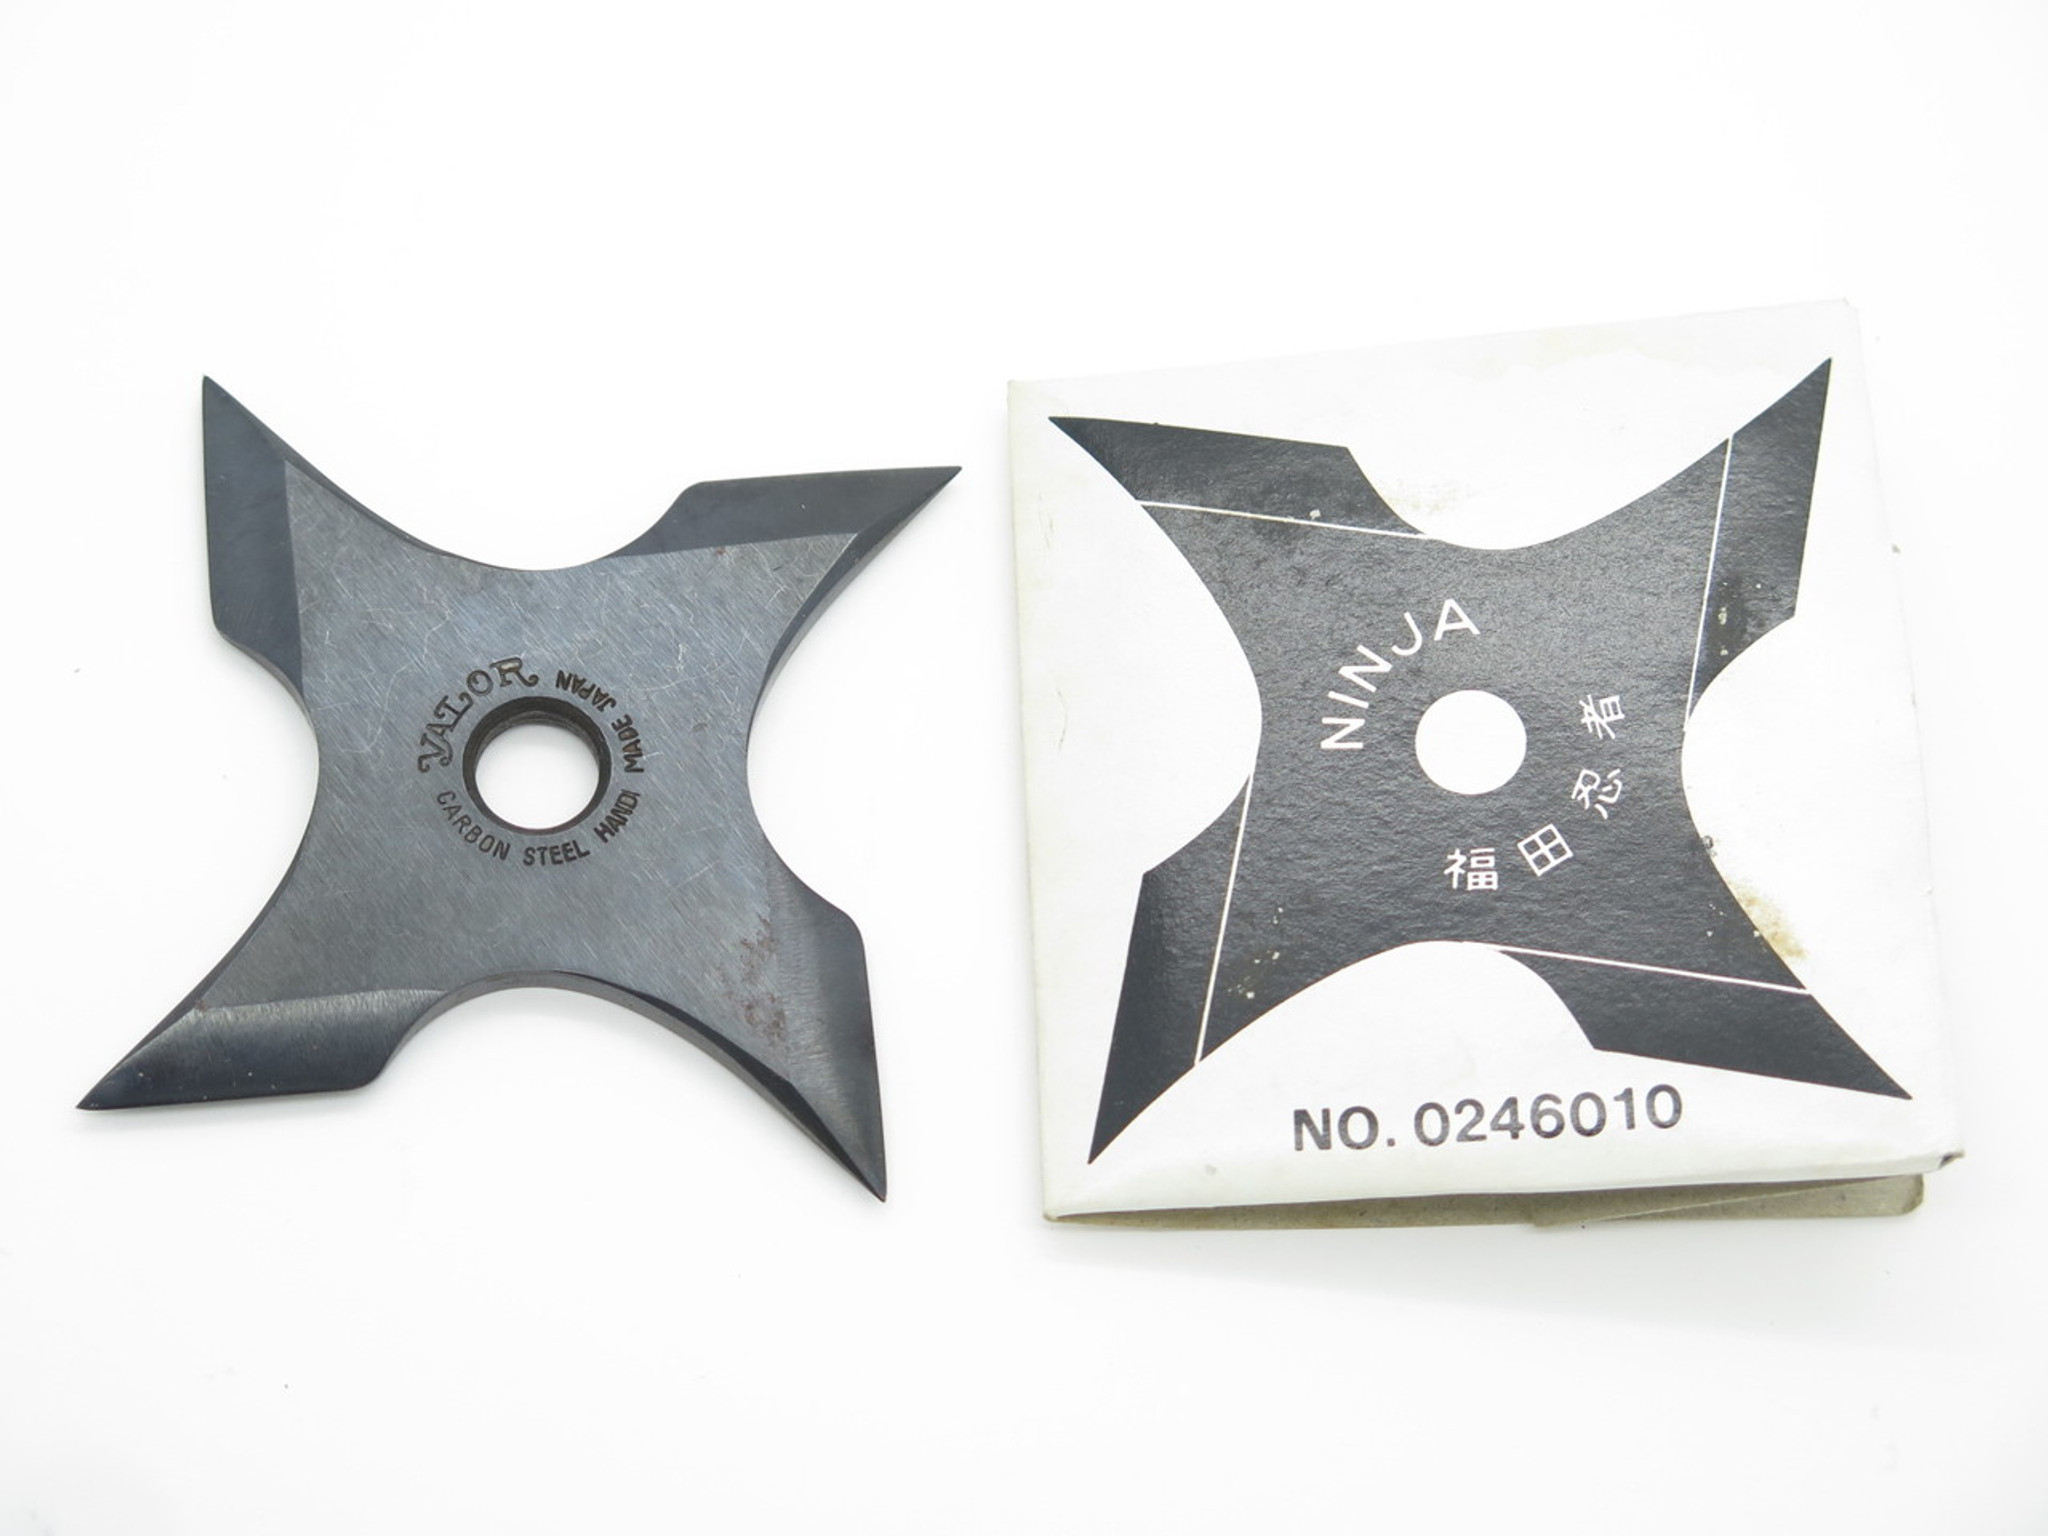 Ninja Stars - A Tactical and Ancient Tool from Japan 